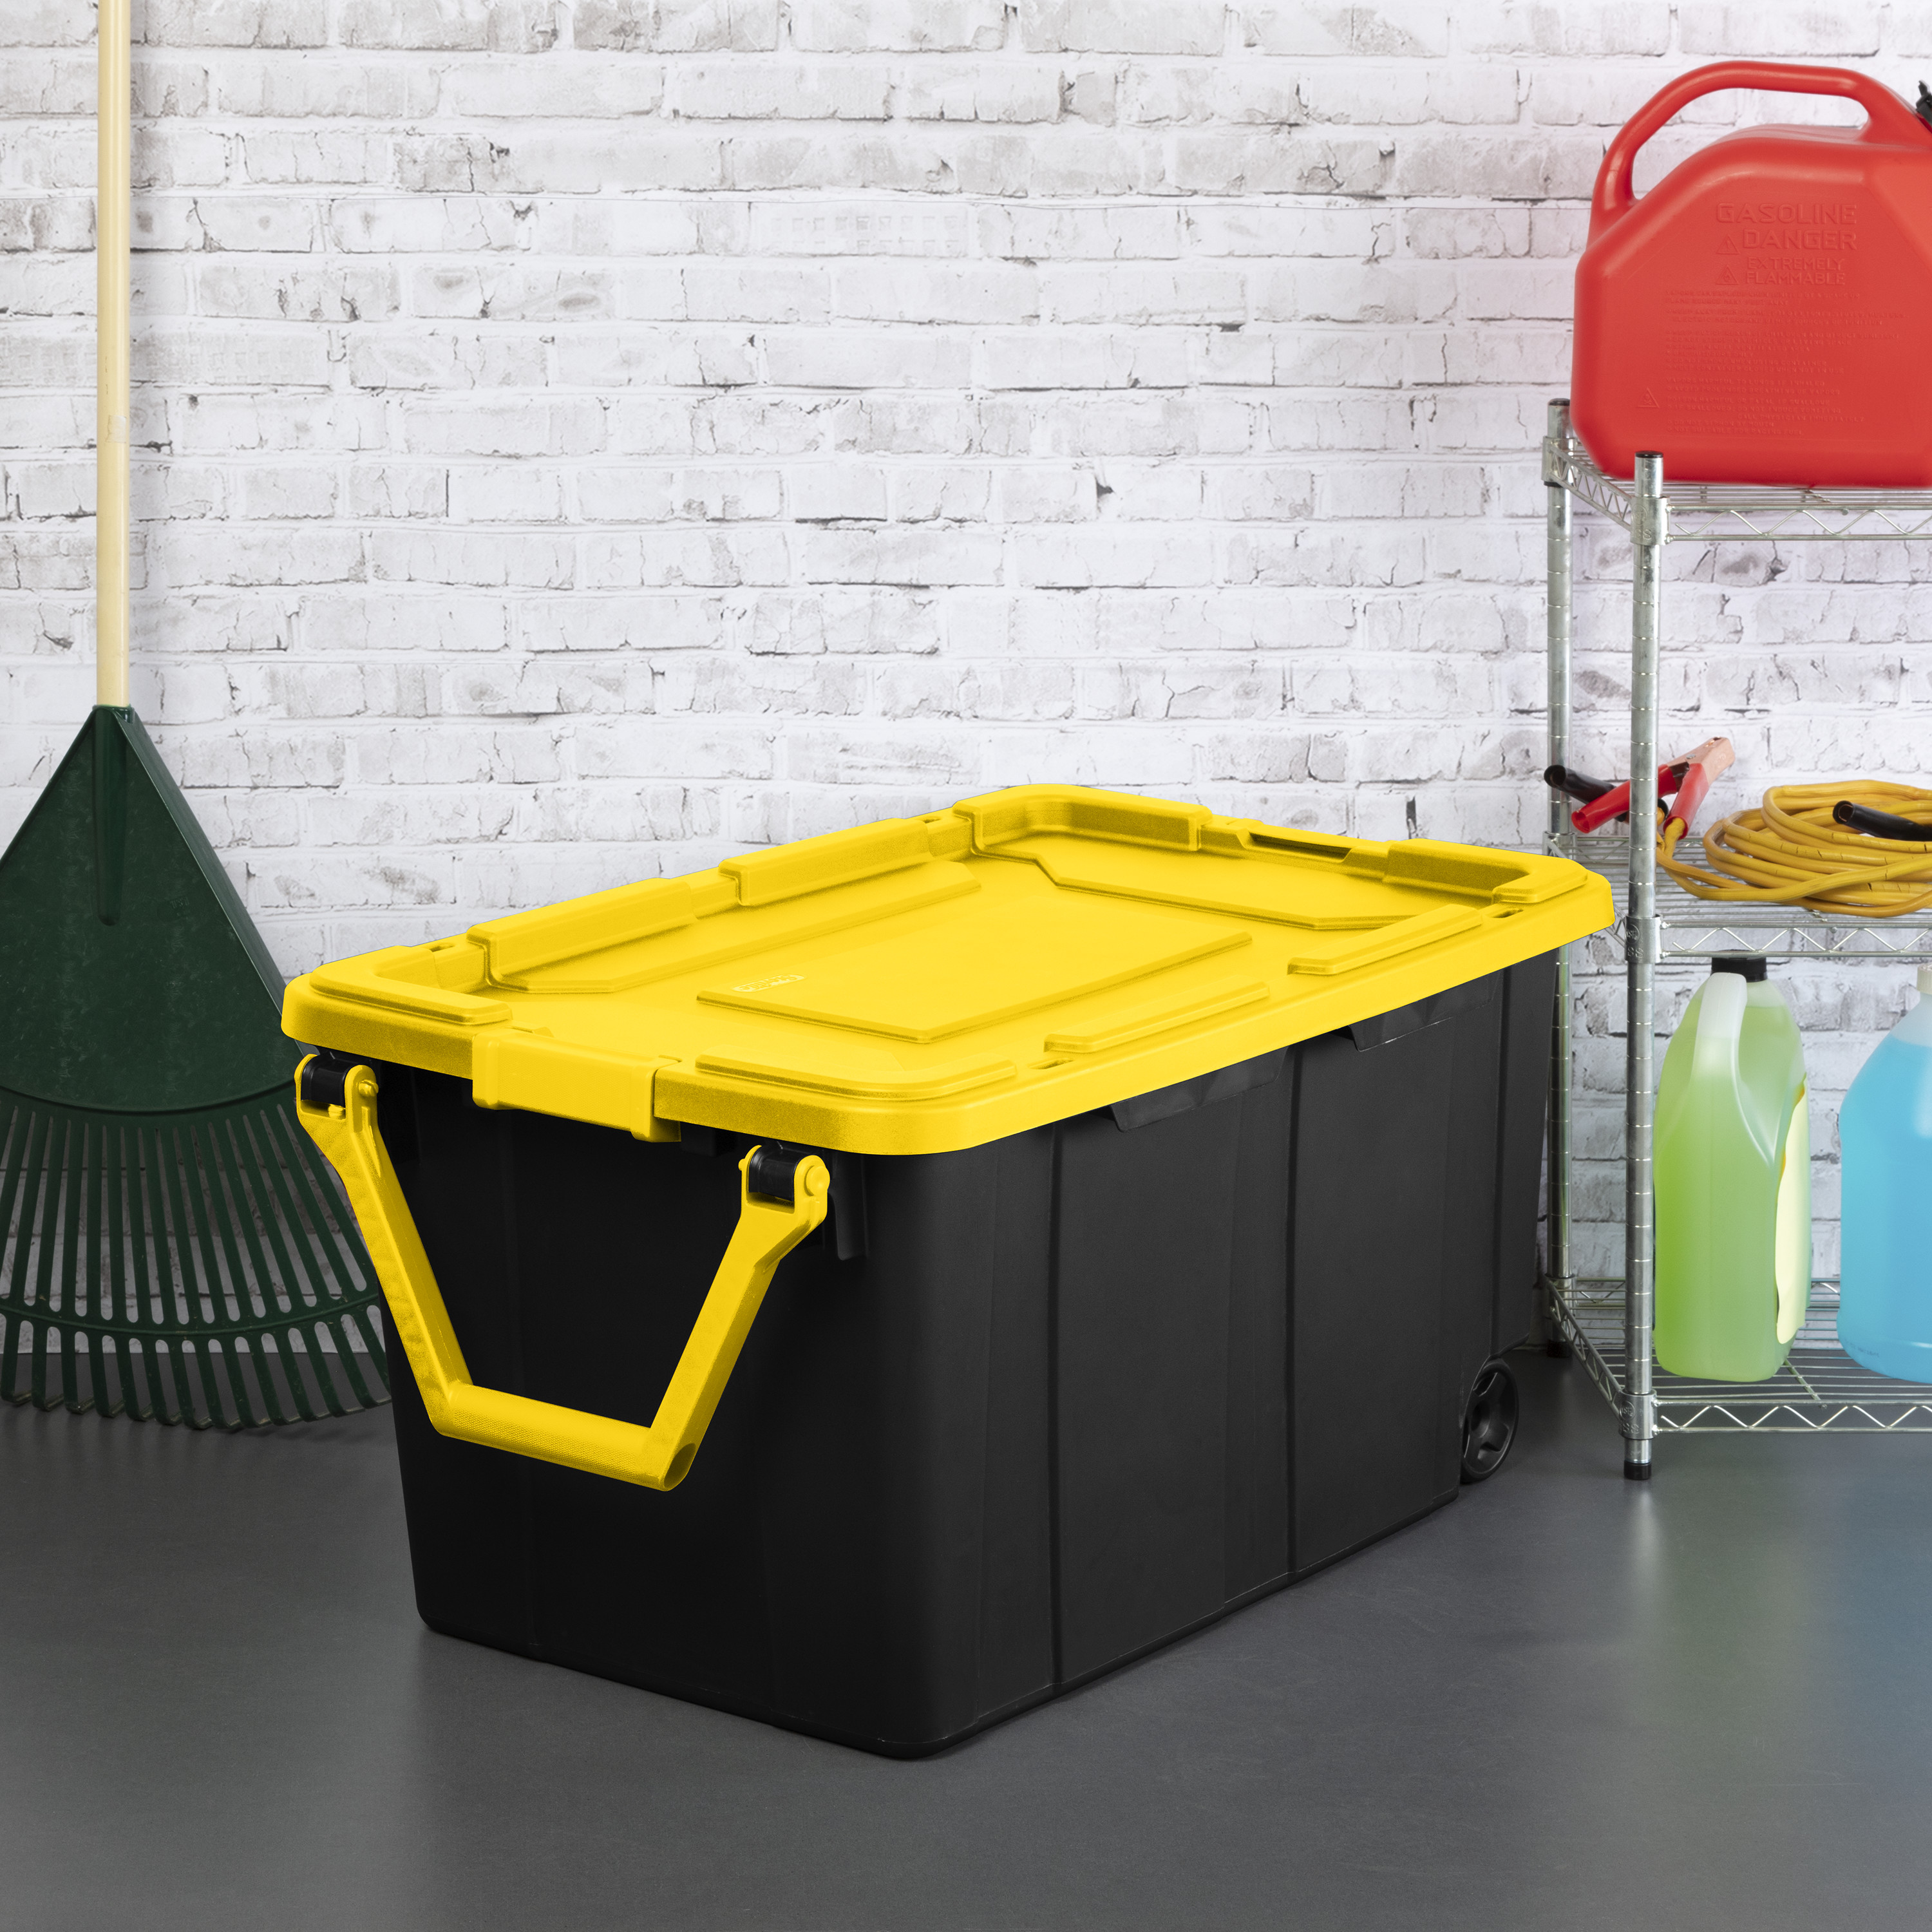 Sterilite Plastic 40 Gallon Wheeled Industrial Storage Tote Yellow Lily, Set of 2 - image 4 of 13